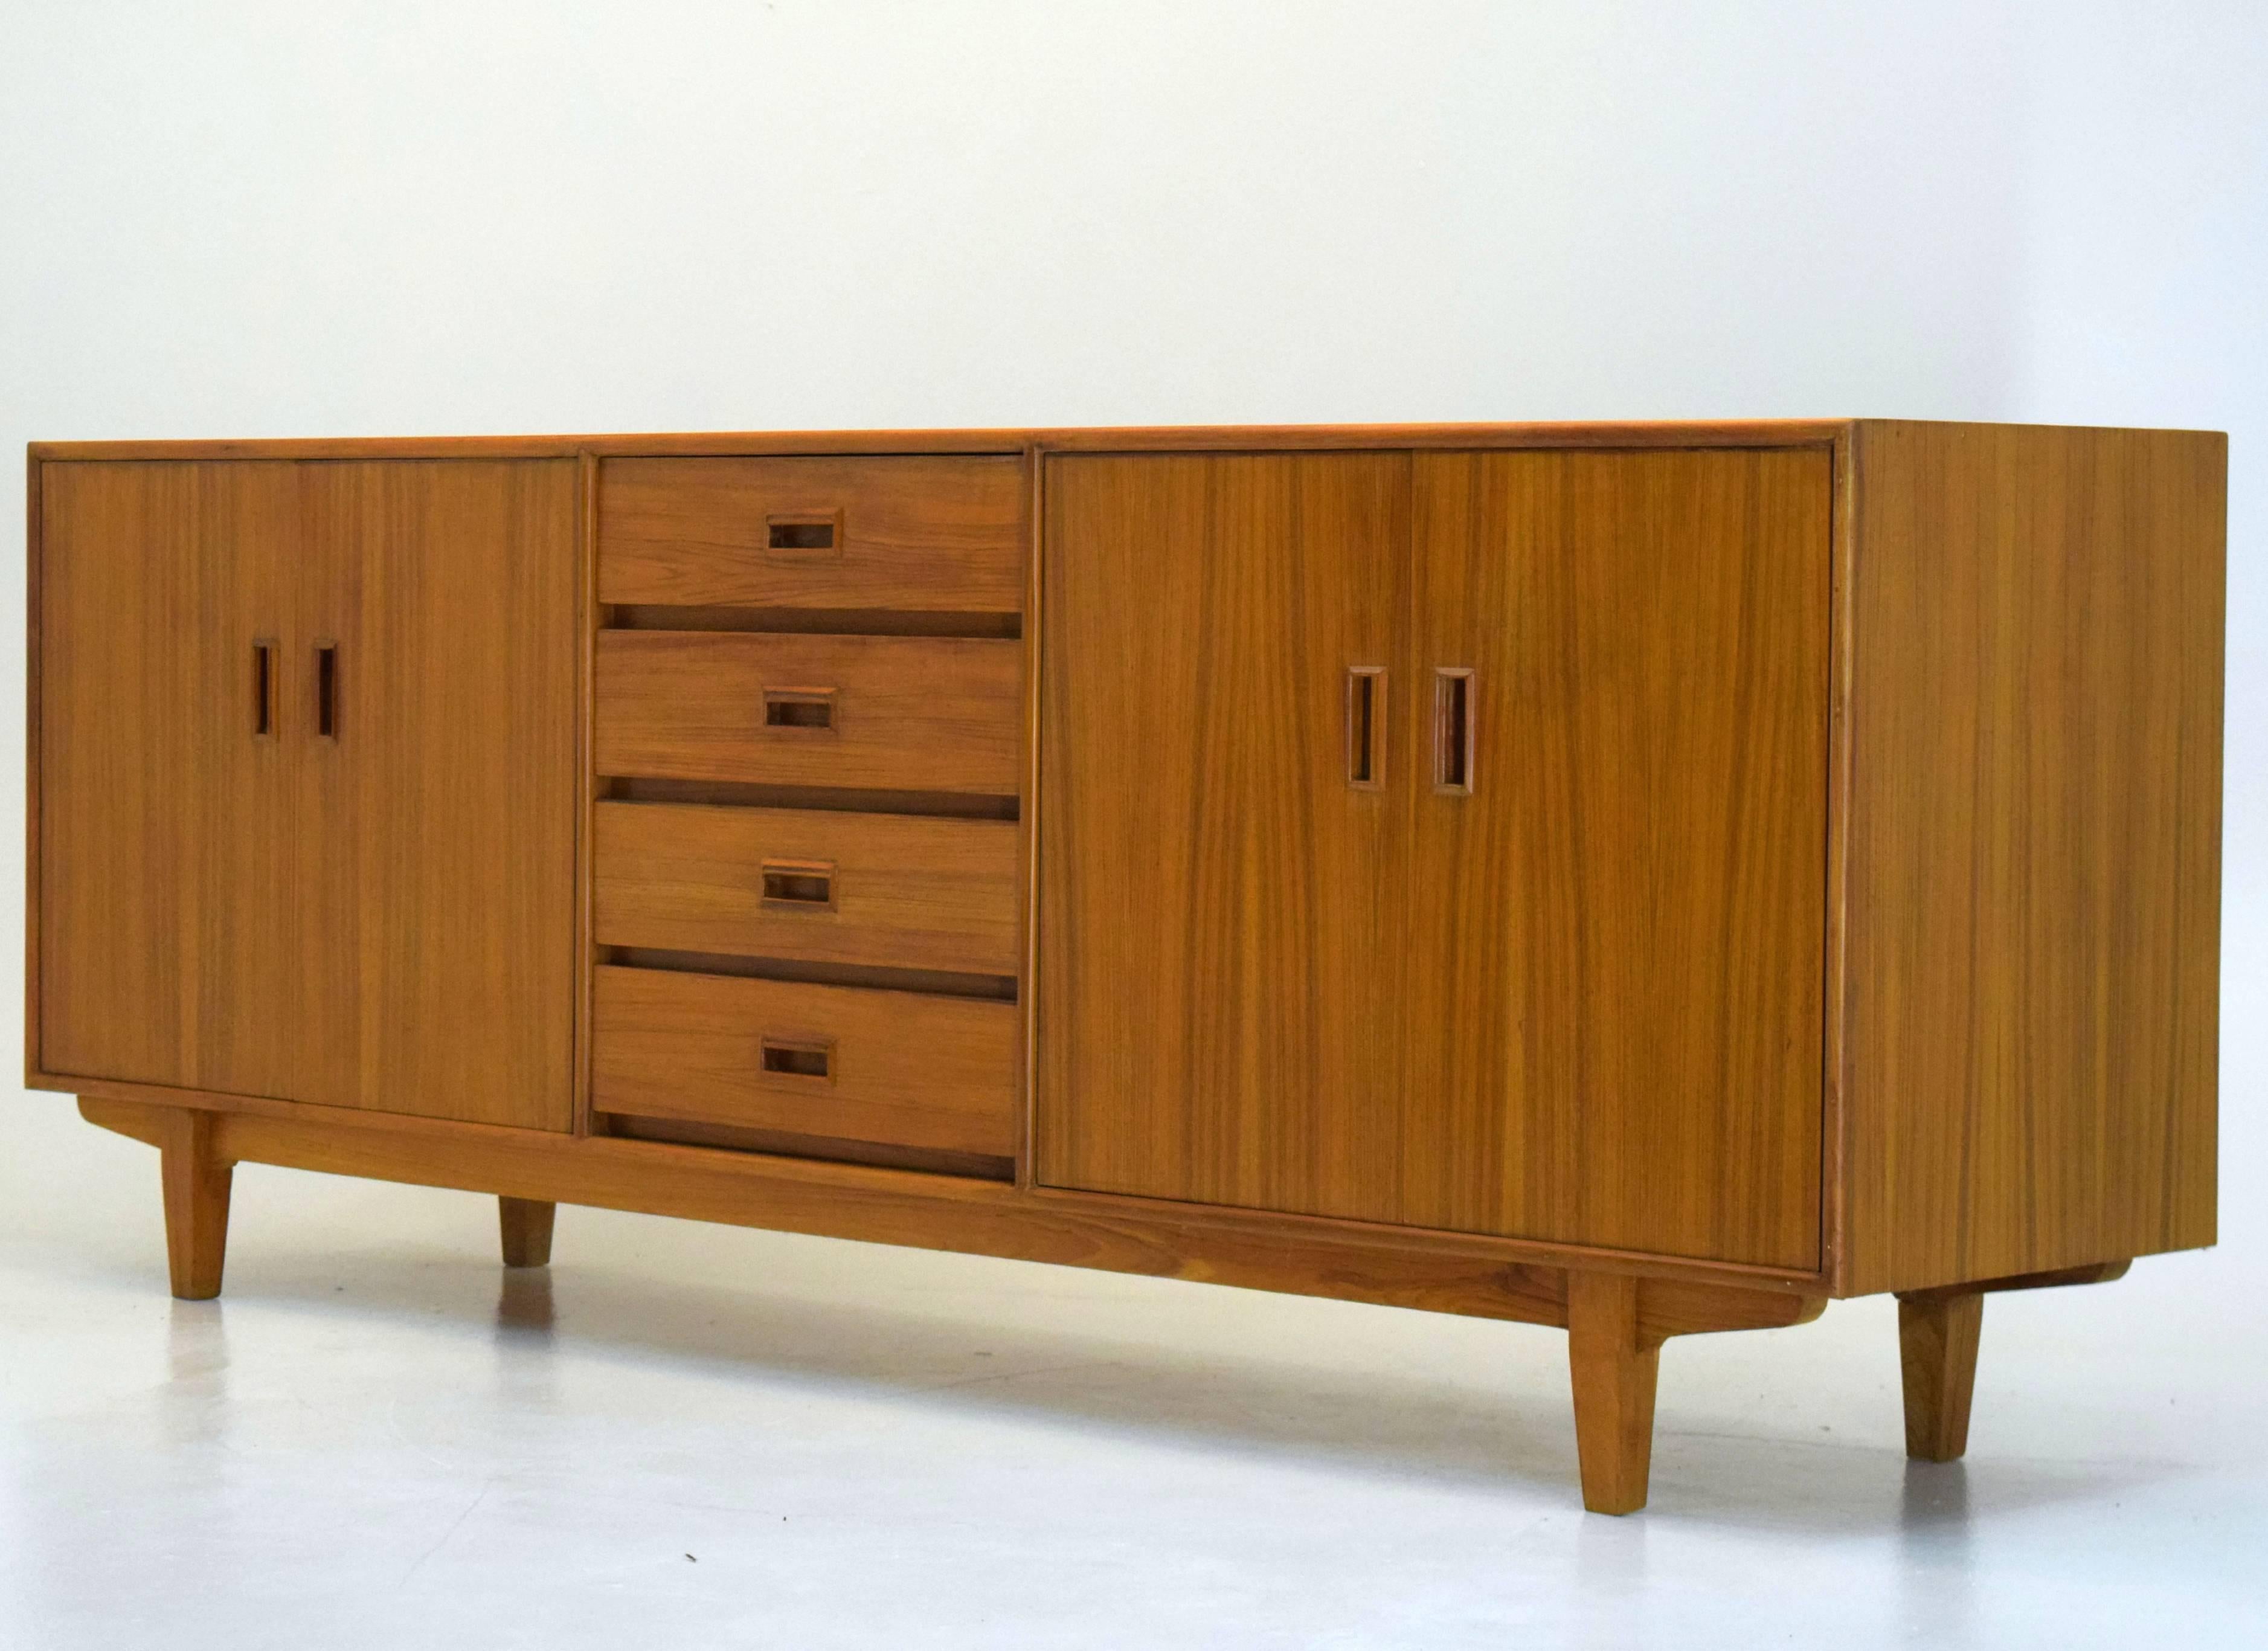 Denmark, circa 1970. Teak. Designer and cabinetmaker unknown, in the style of Borge Mogensen. Measures: 84 wide x 31 tall x 18.5 inches deep. Custom built and a one of a kind unique piece. The condition is excellent. It is exceptionally well built